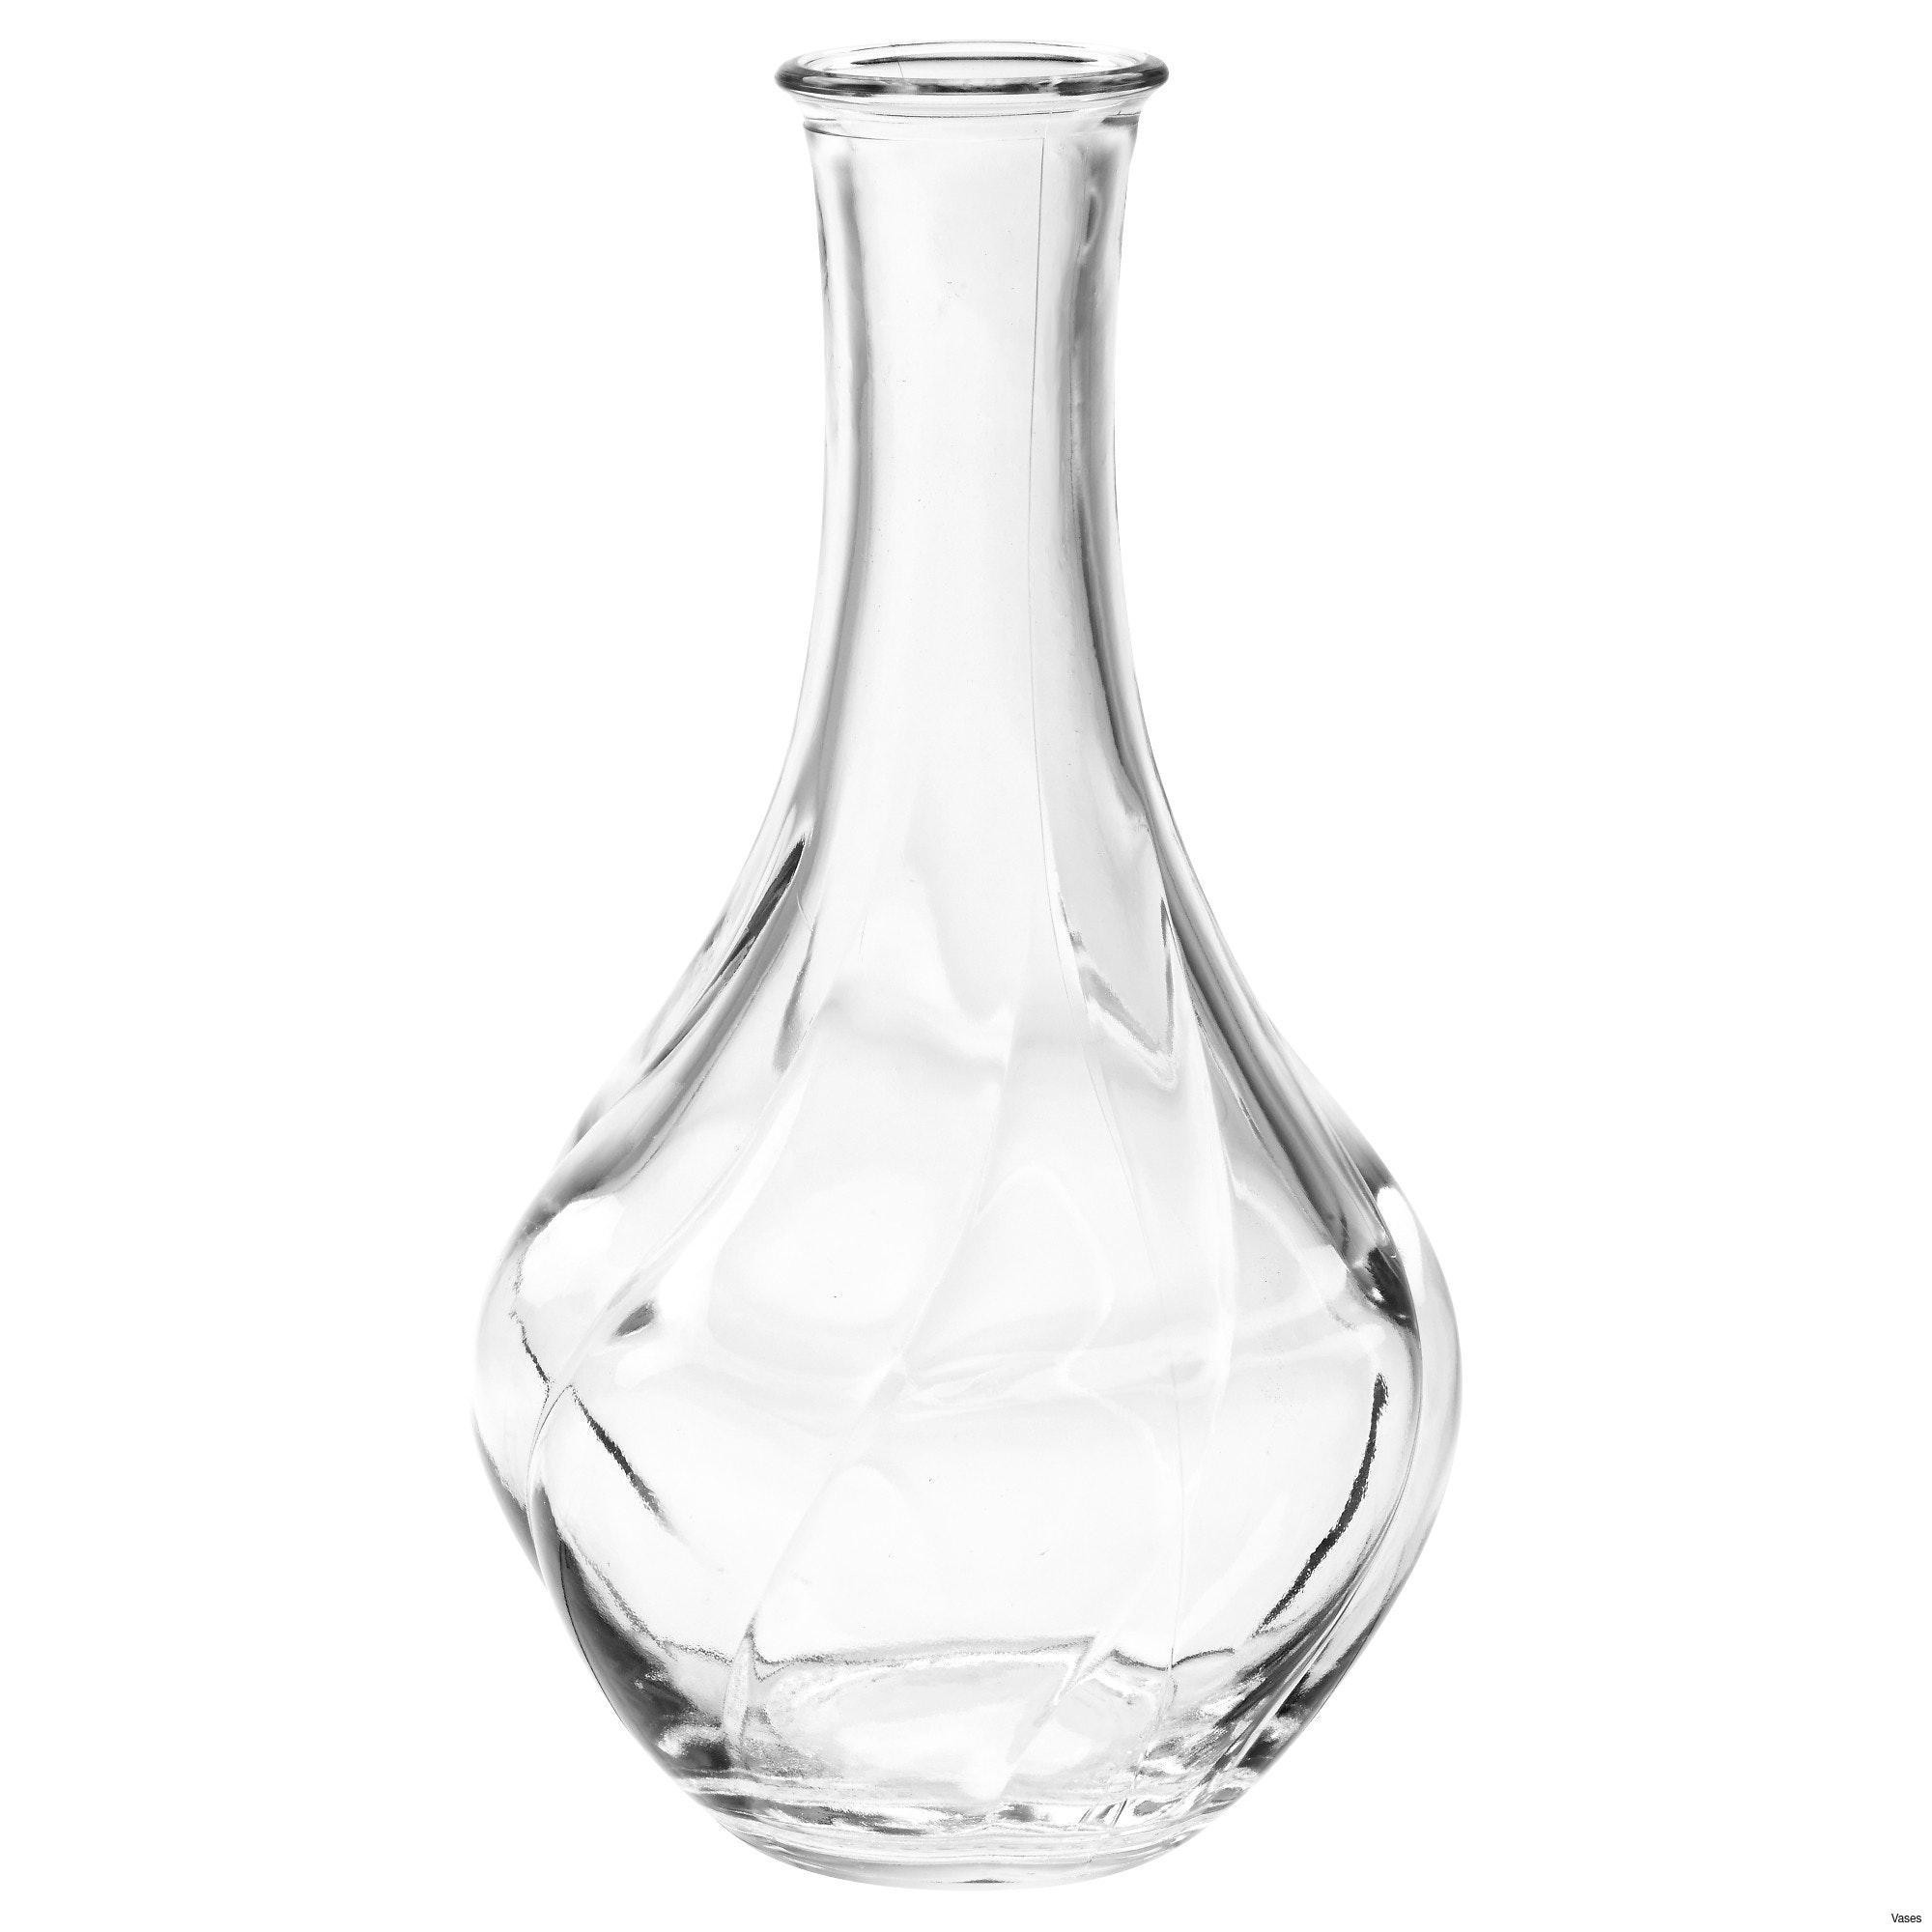 28 Unique Big Chinese Vase 2024 free download big chinese vase of large glass vase photos vases flower floor vase with flowersi 0d in large glass vase gallery living room glass vases fresh clear vase 0d tags amazing and of